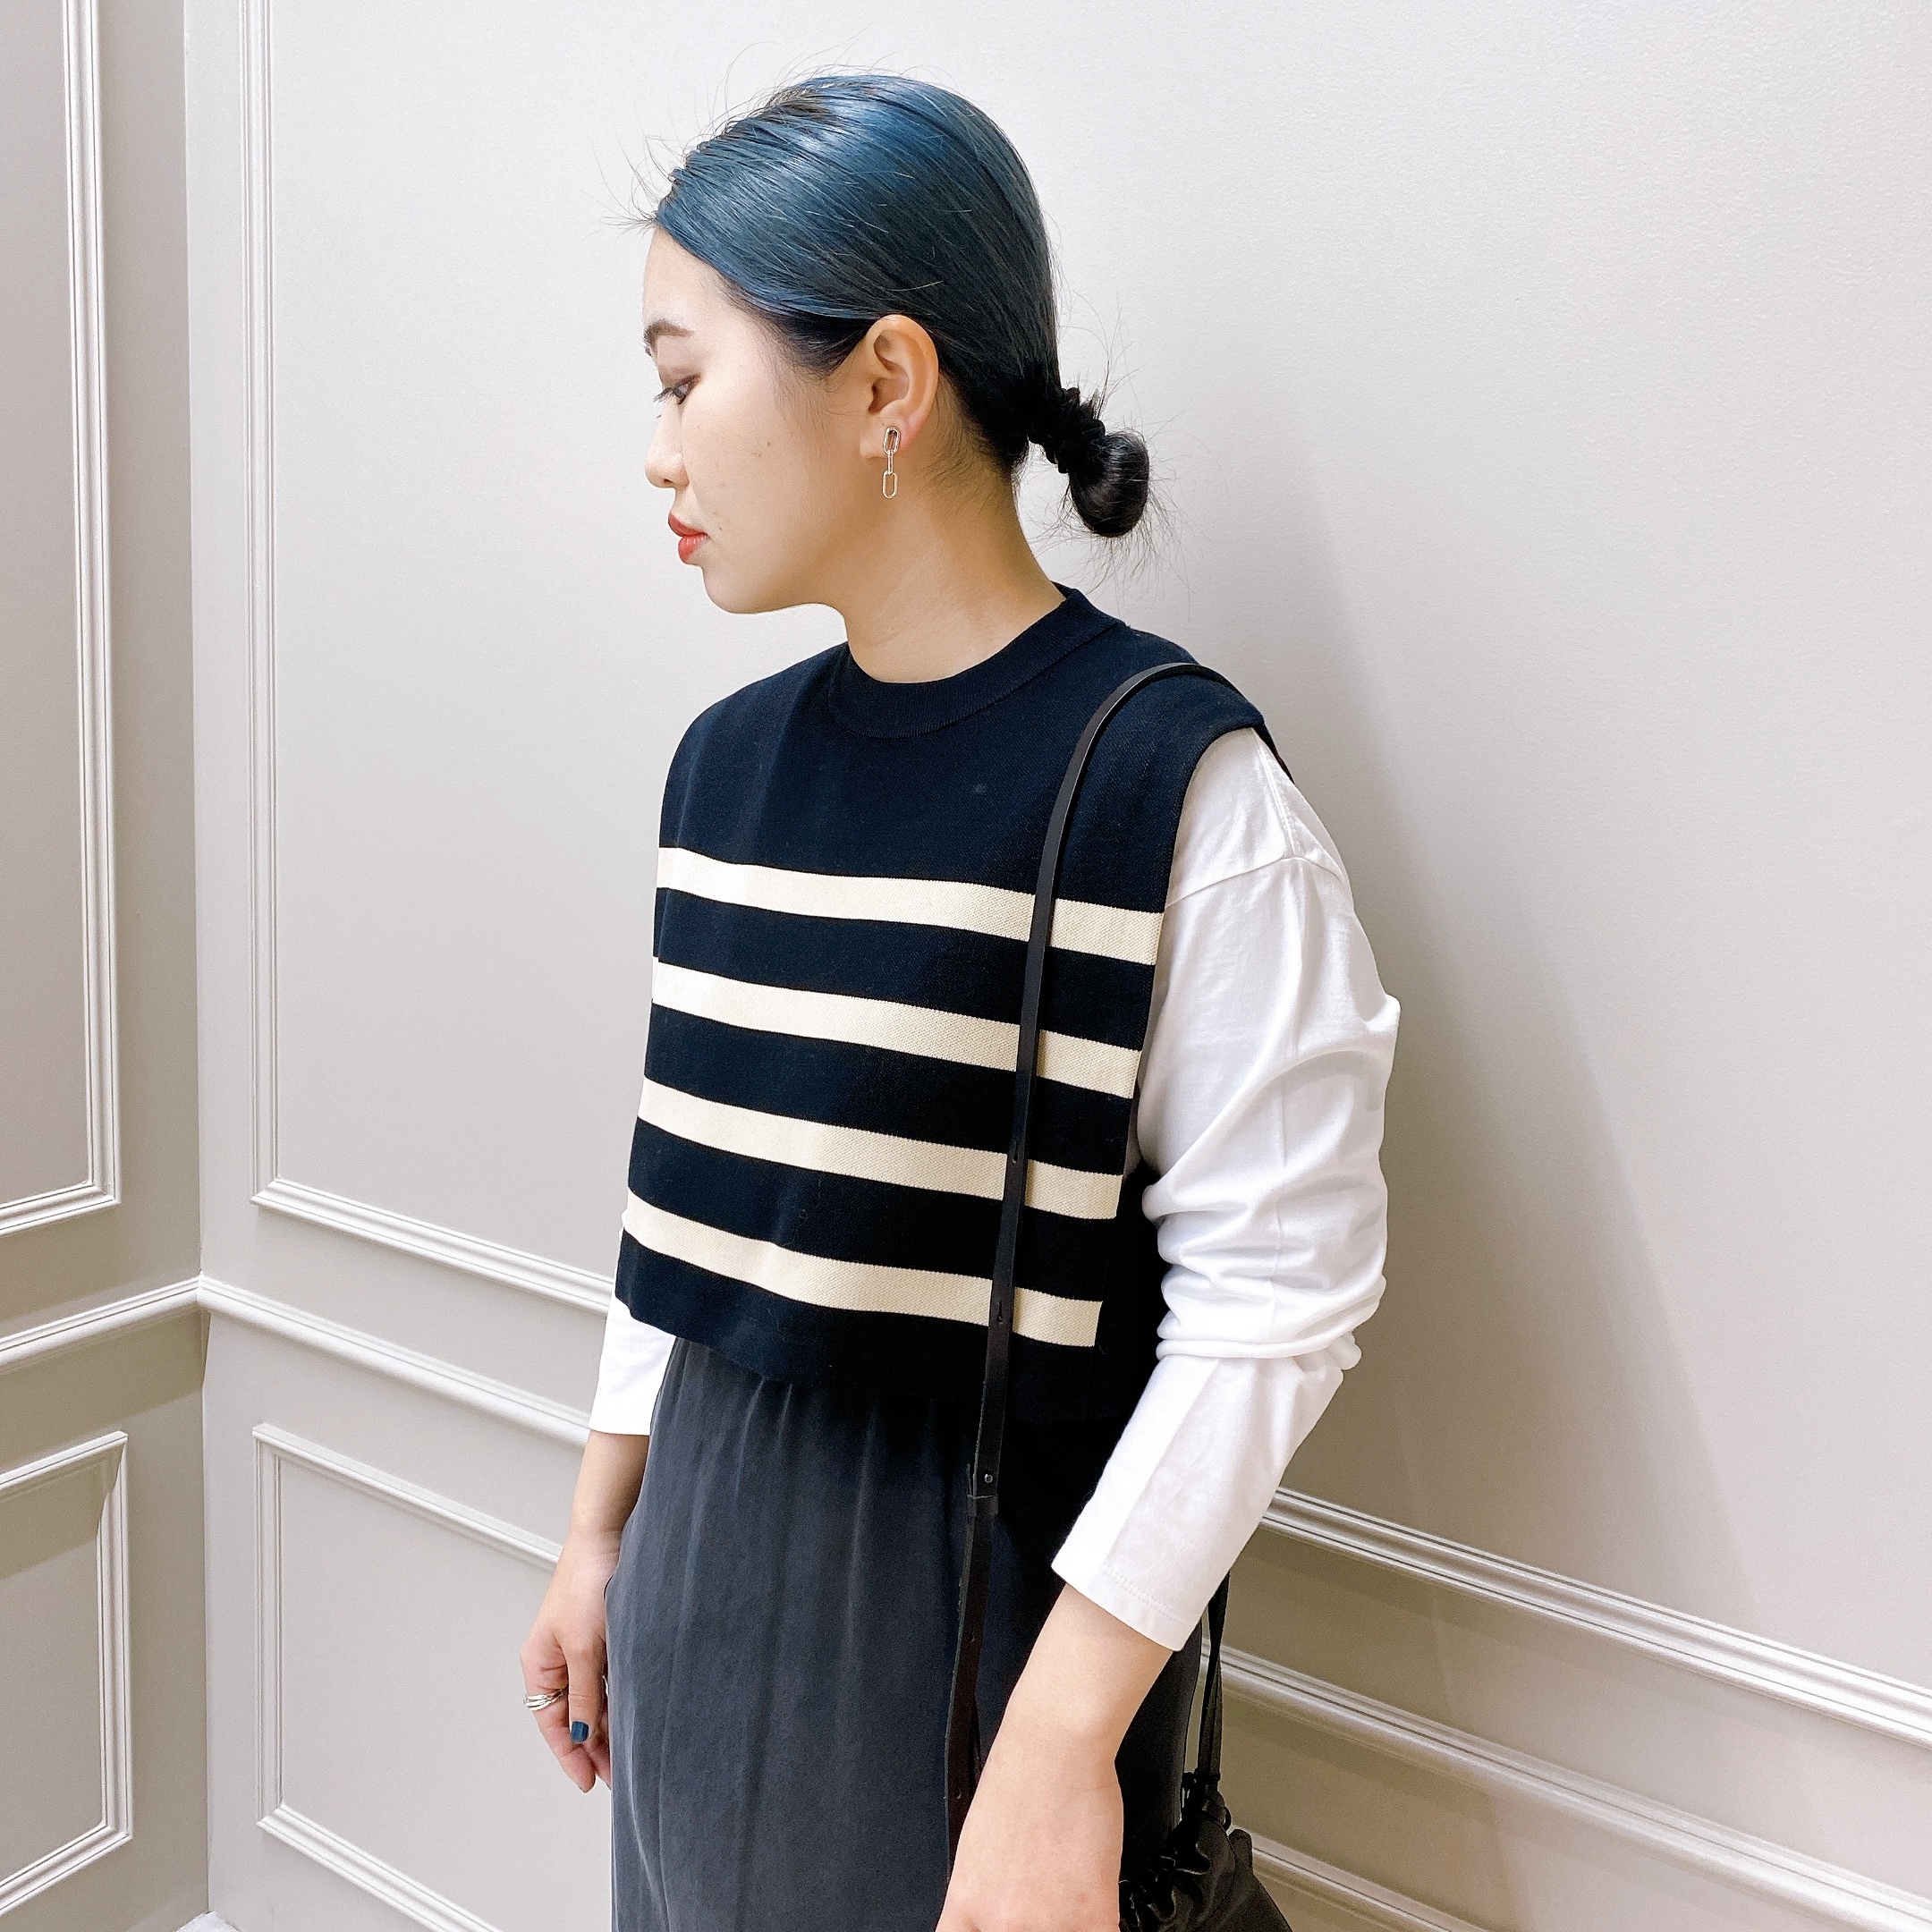 HYKE】striped sweater cropped top-